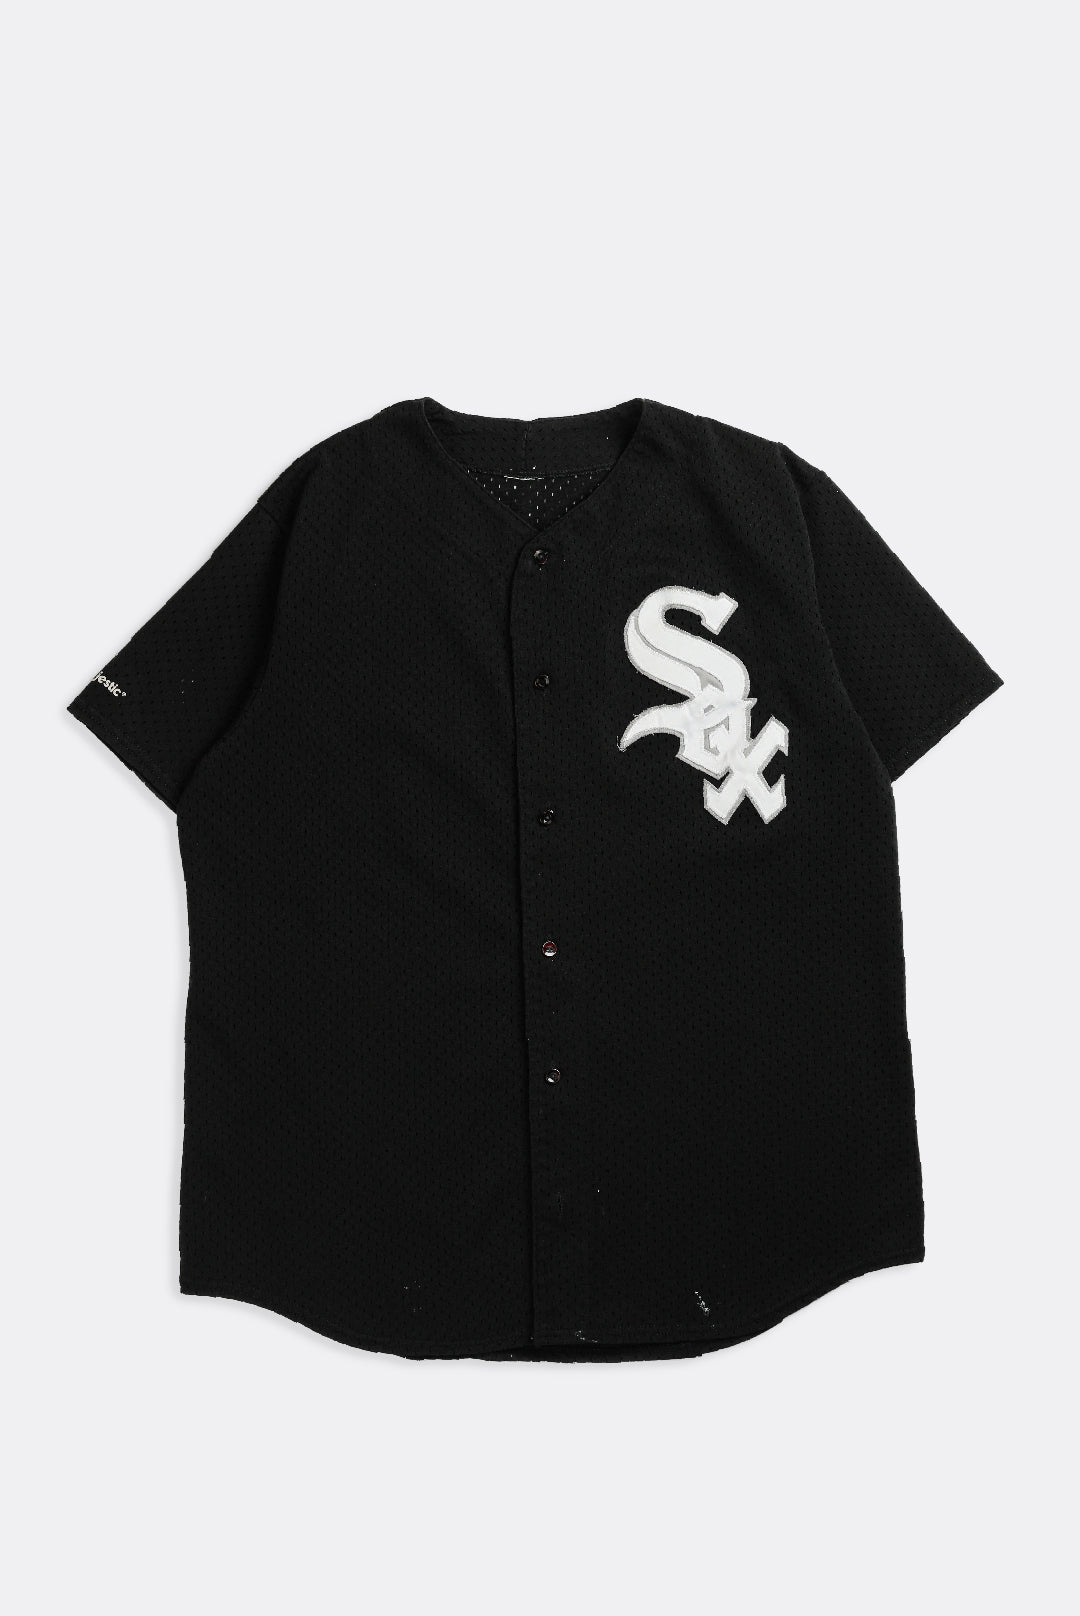 vintage chicago white sox jersey